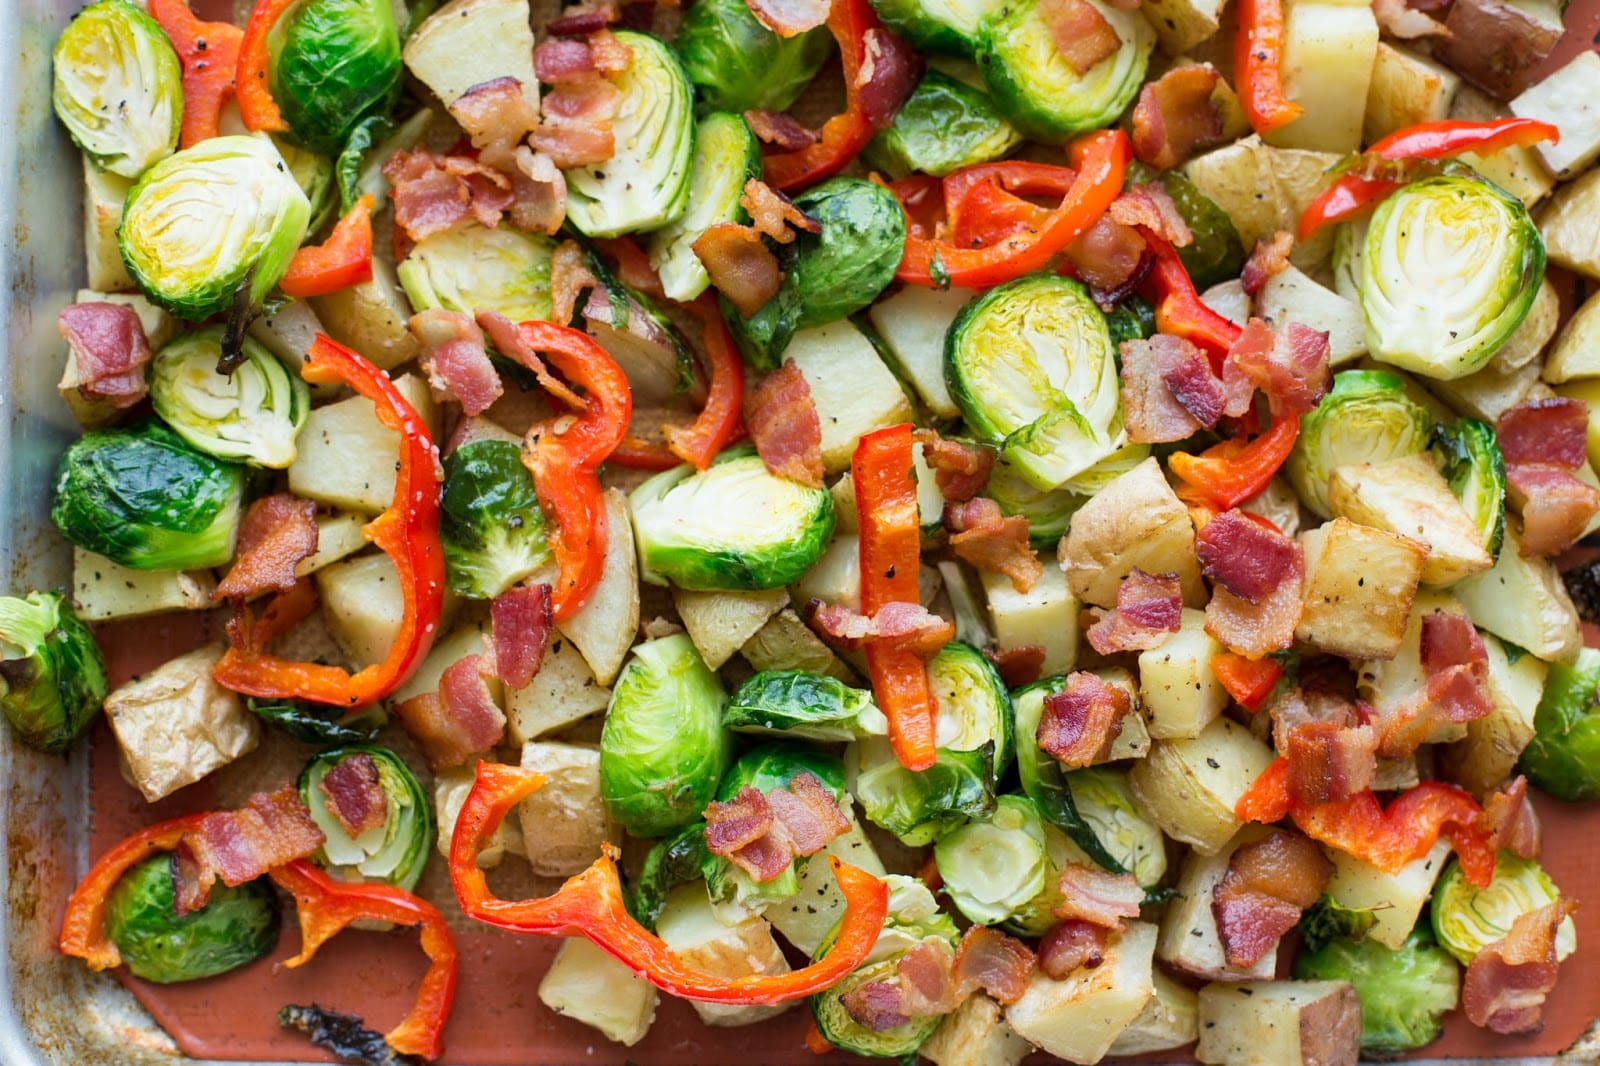 Roasted Potatoes, Brussels Sprouts, Red Pepper and Bacon